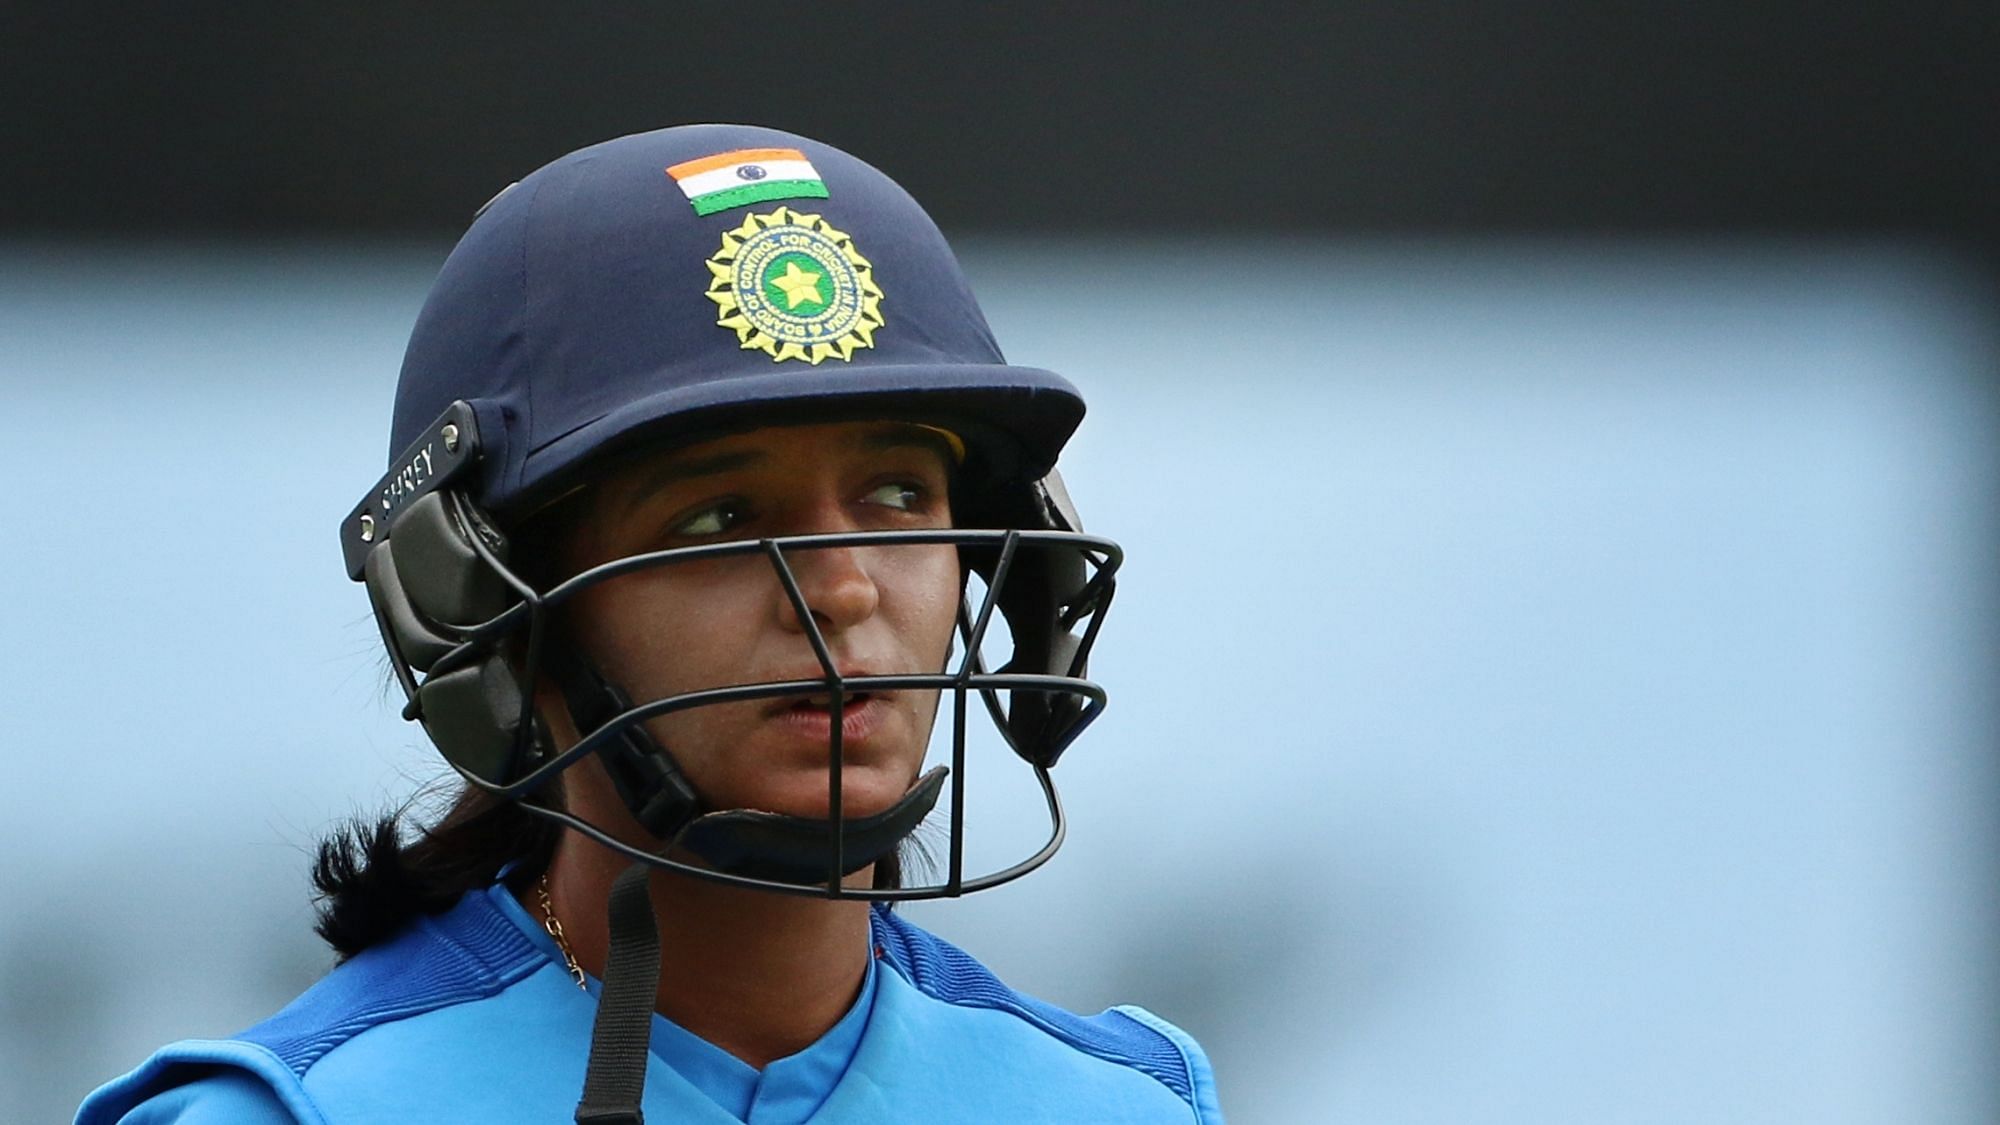 Harmanpreet Kaur said her parents travelled to Sydney to watch her play the Women’s T20 World cup semi-final. It was the first time they were going to watch her play an international game.